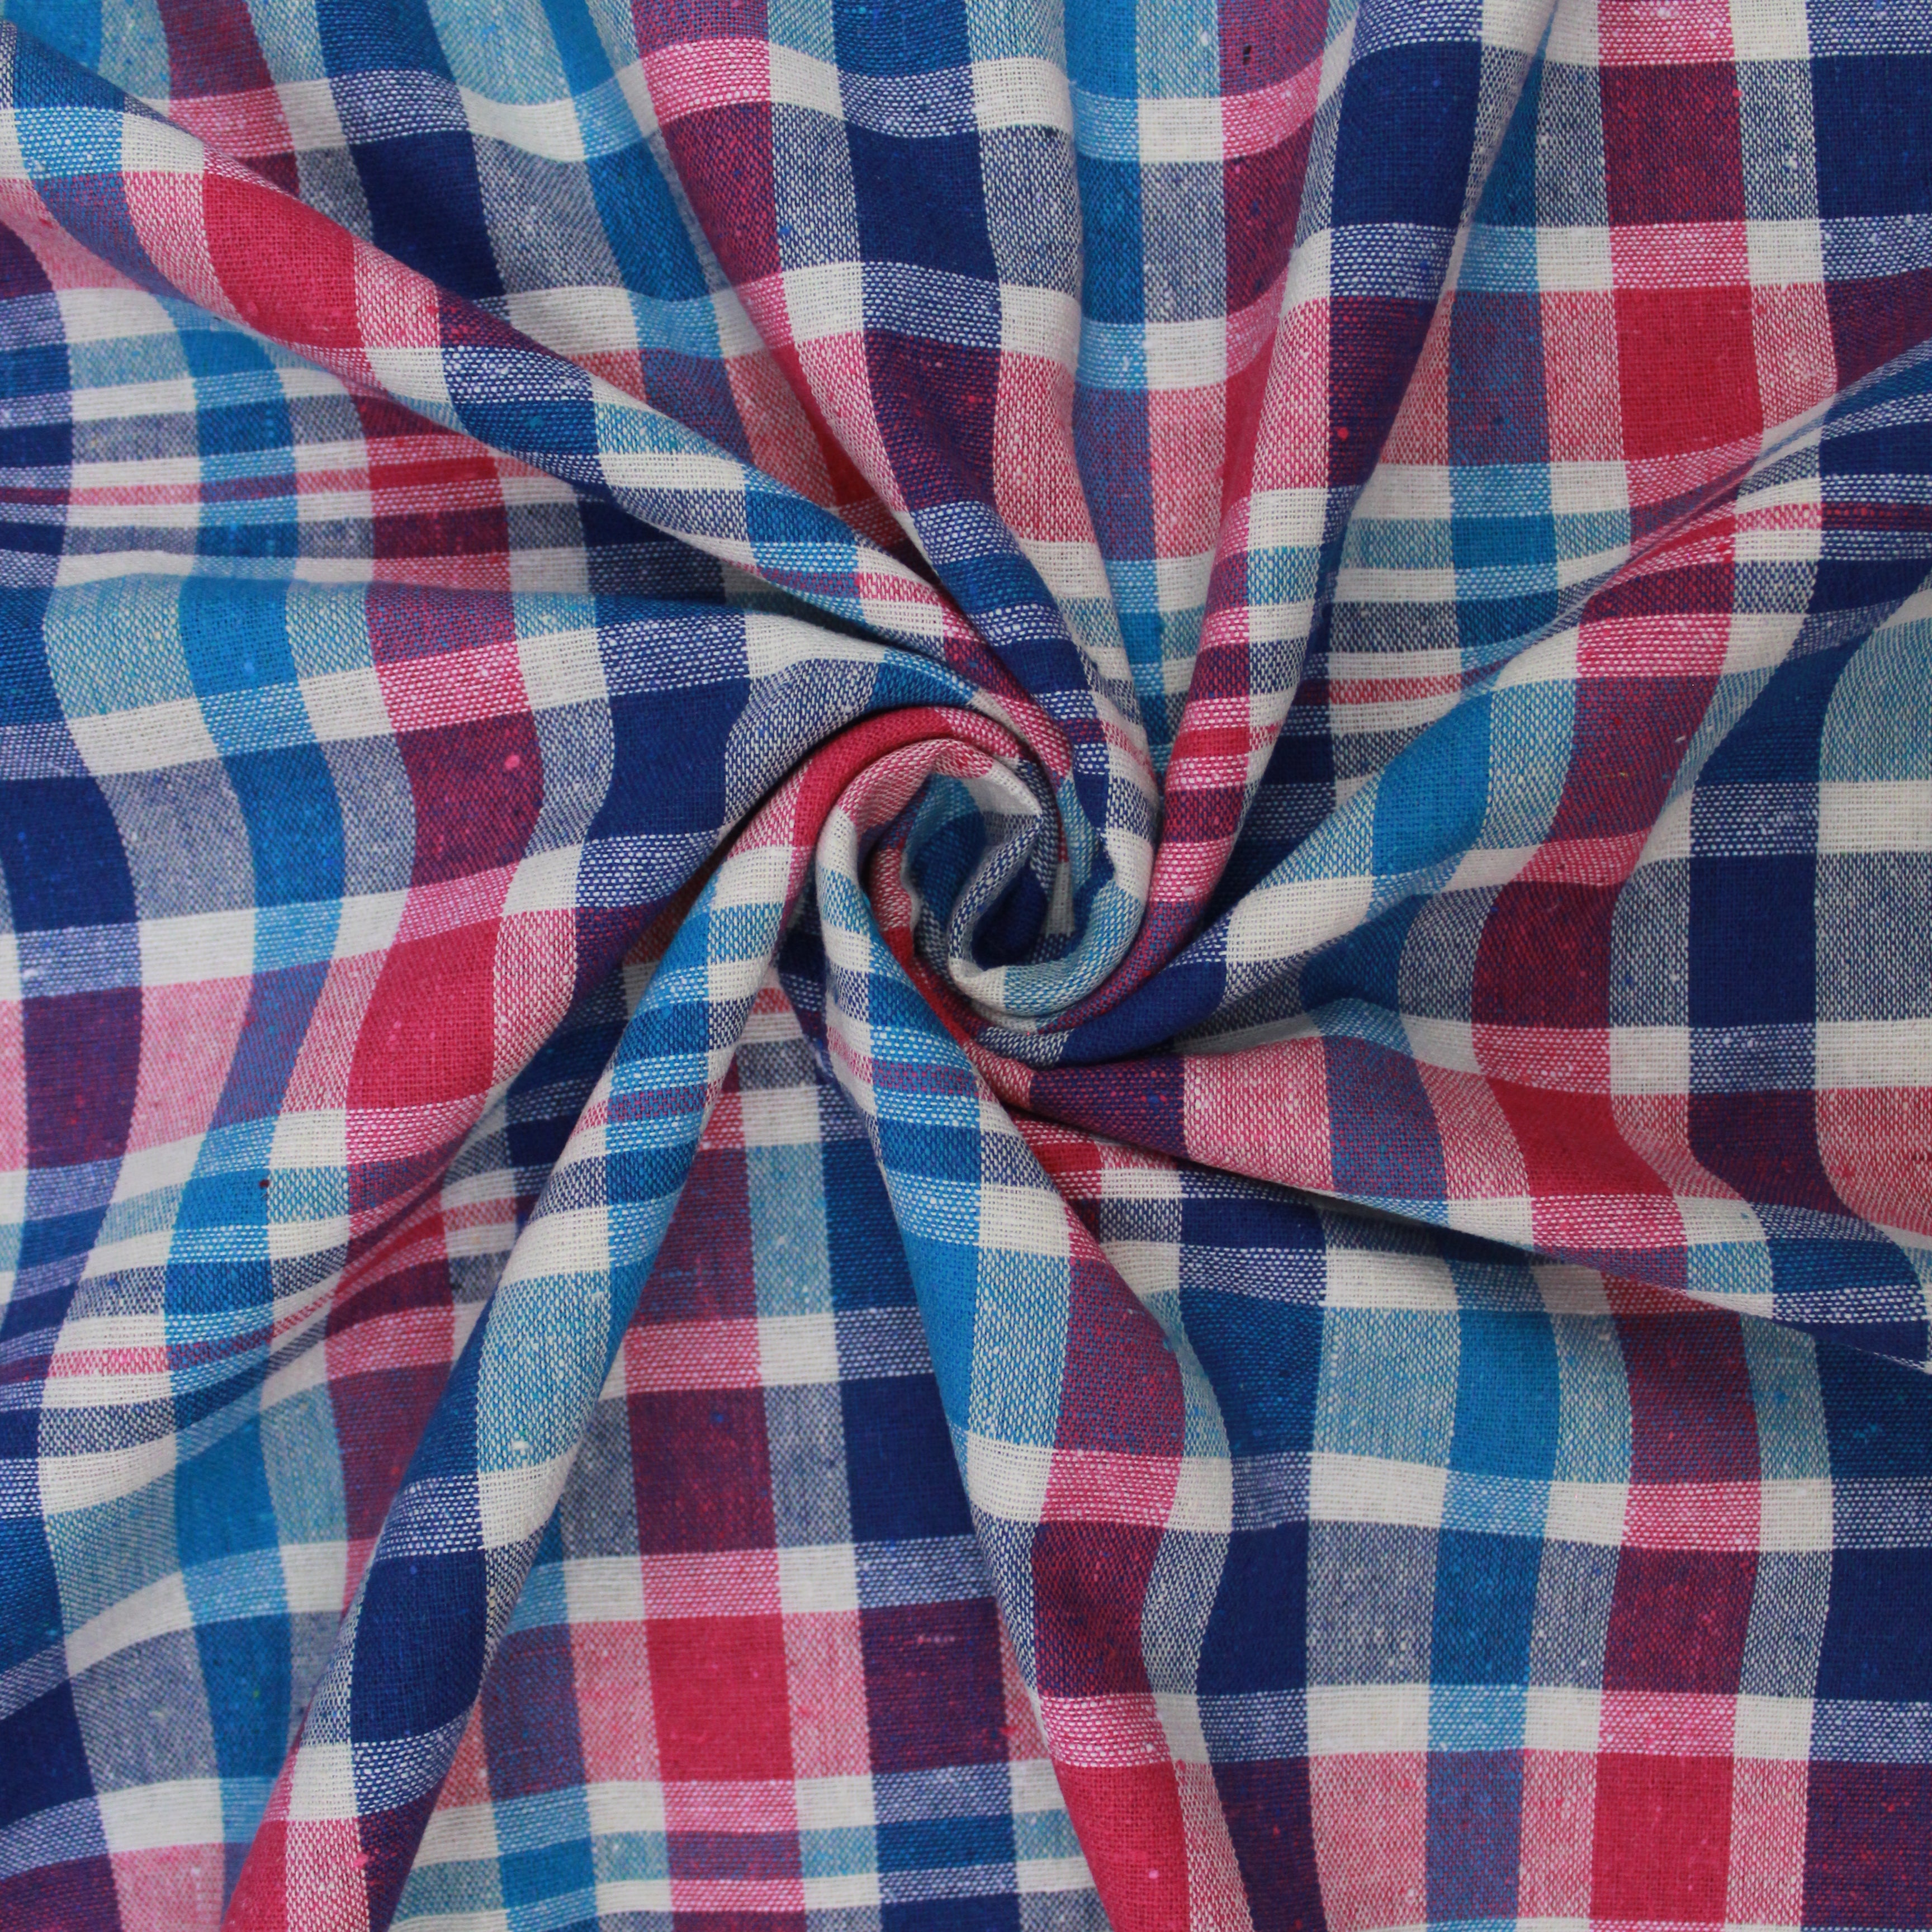 3FOR12 Premium Quality, Fashion Chequered Linen 54" Wide Blue & Pink